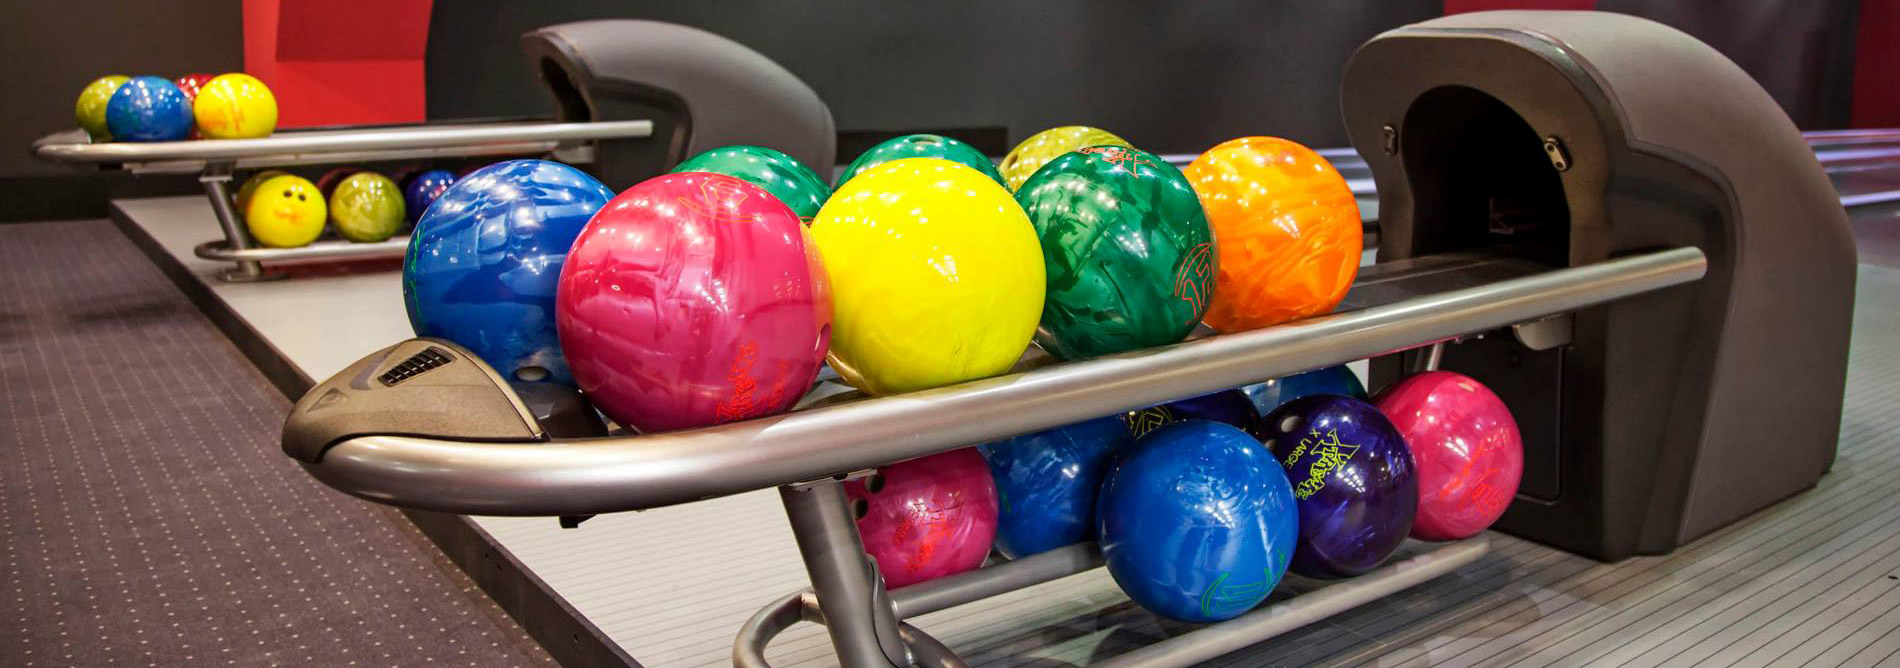 Bowling-QubicaAMF-furniture-harmony-ball-return-banner-feature.jpg